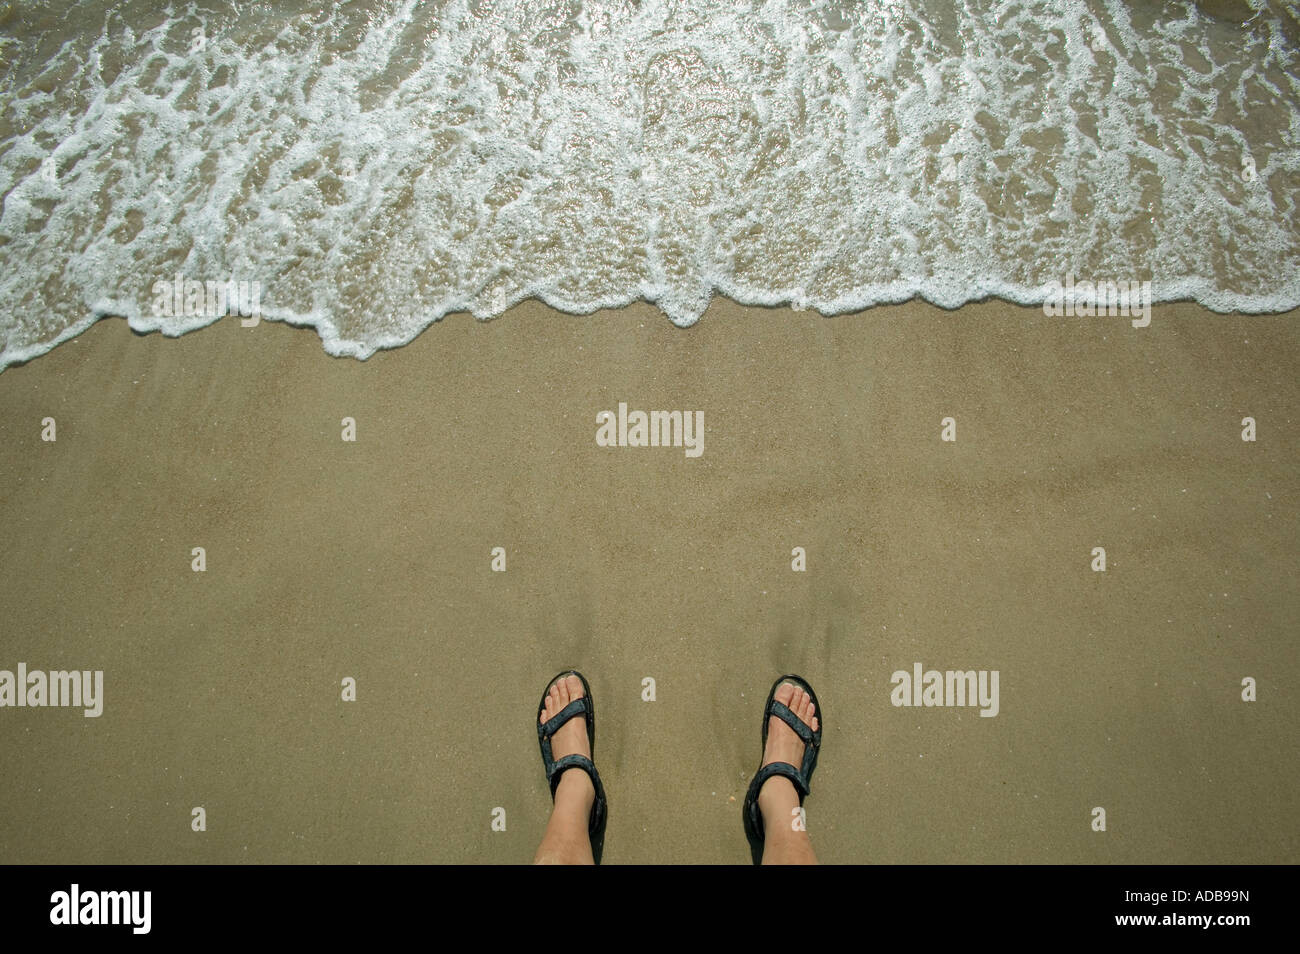 Overhead shot of feet on beach with waves Stock Photo